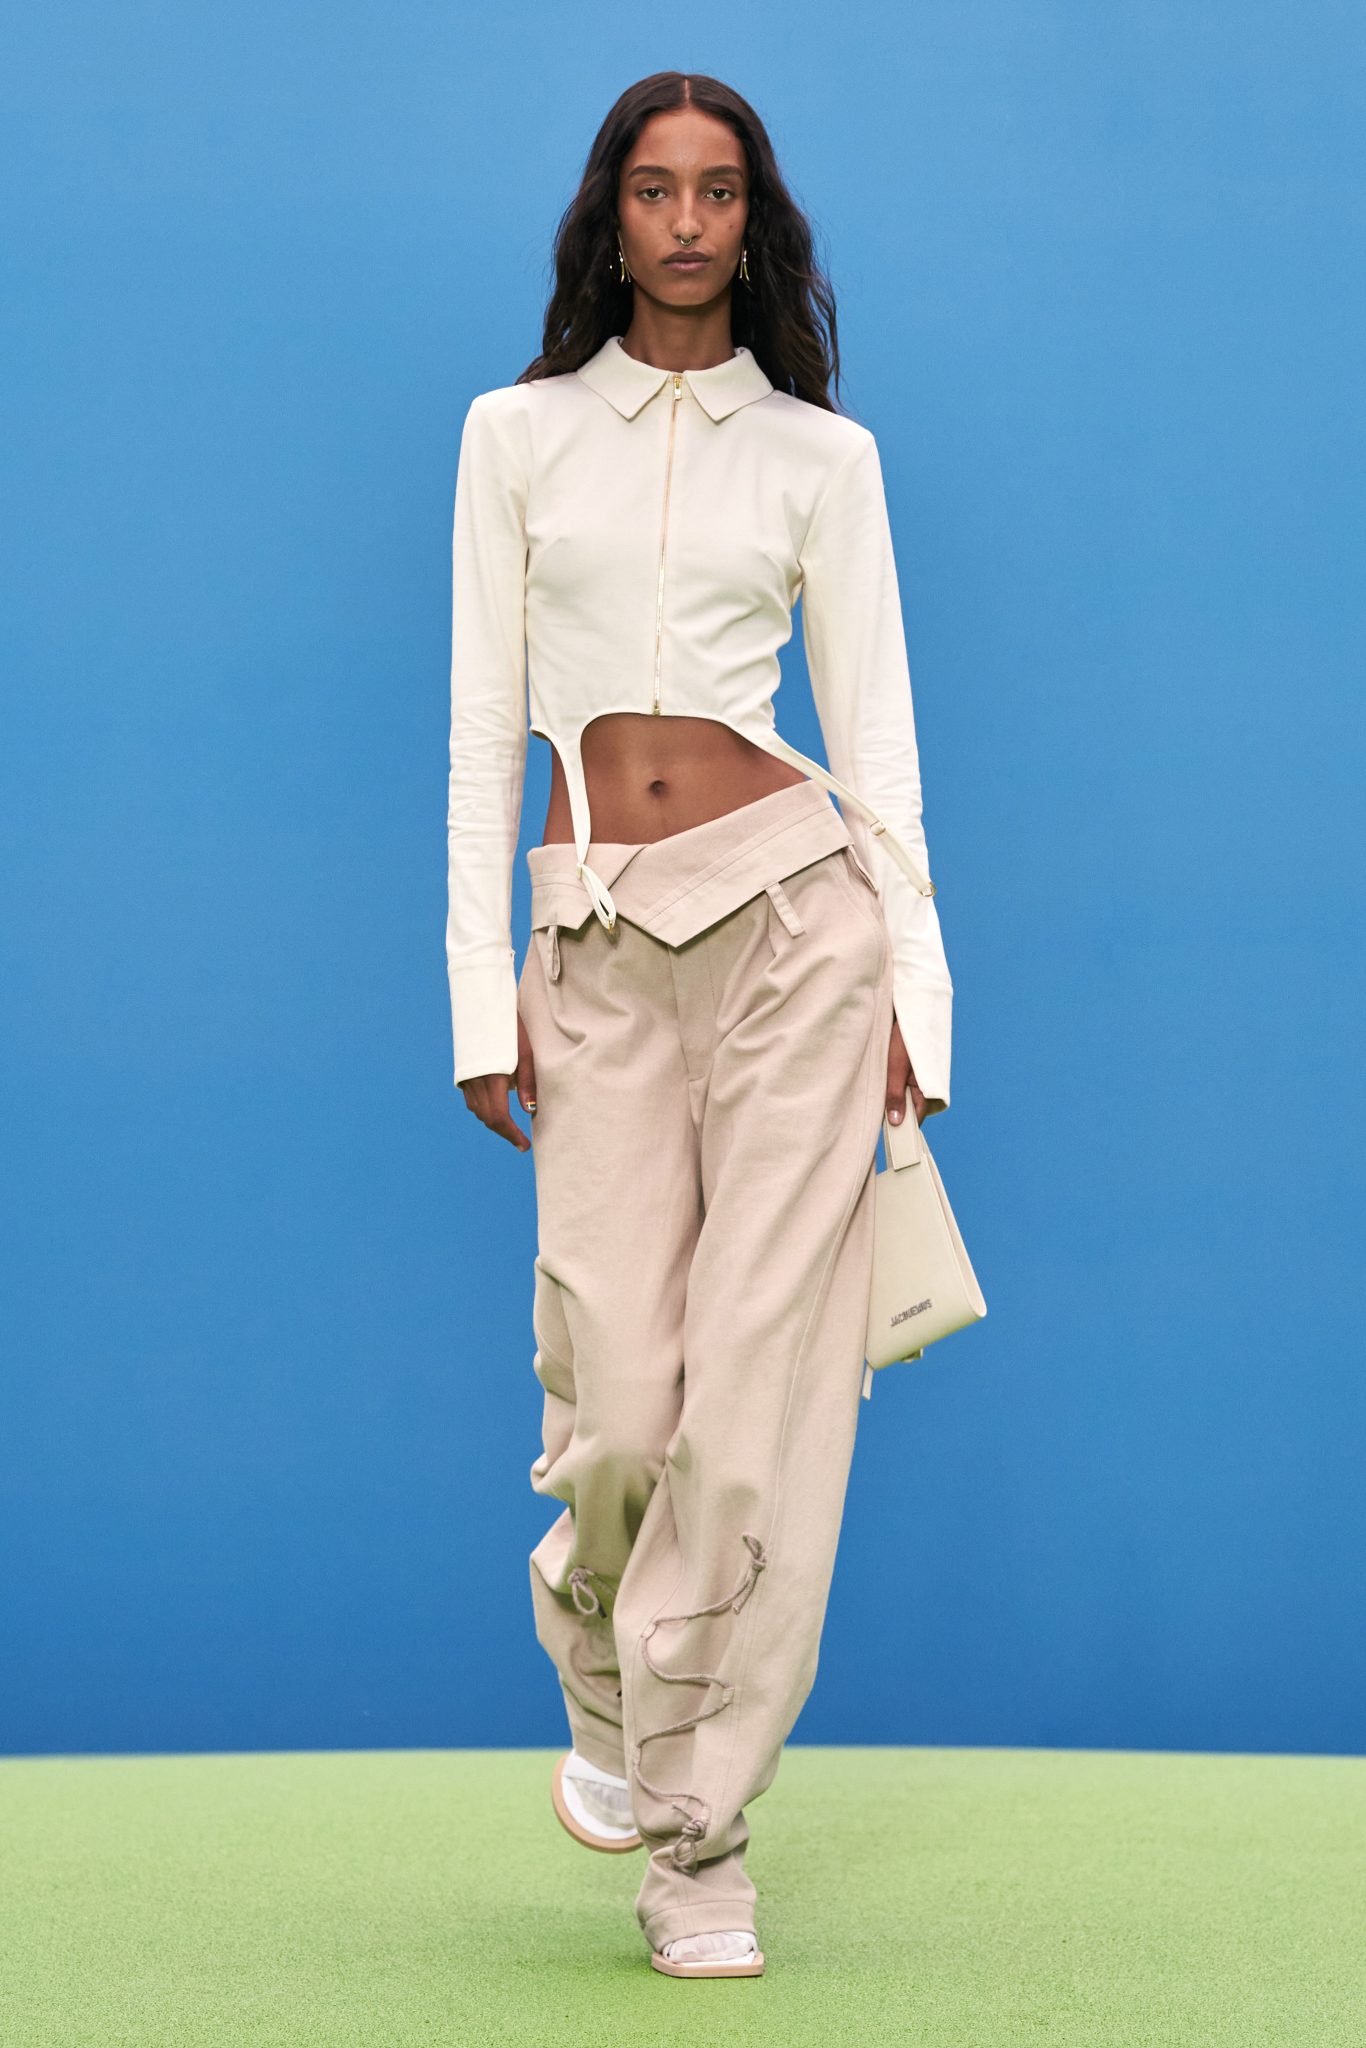 Jacquemus presents the new collection La Montagne for Spring